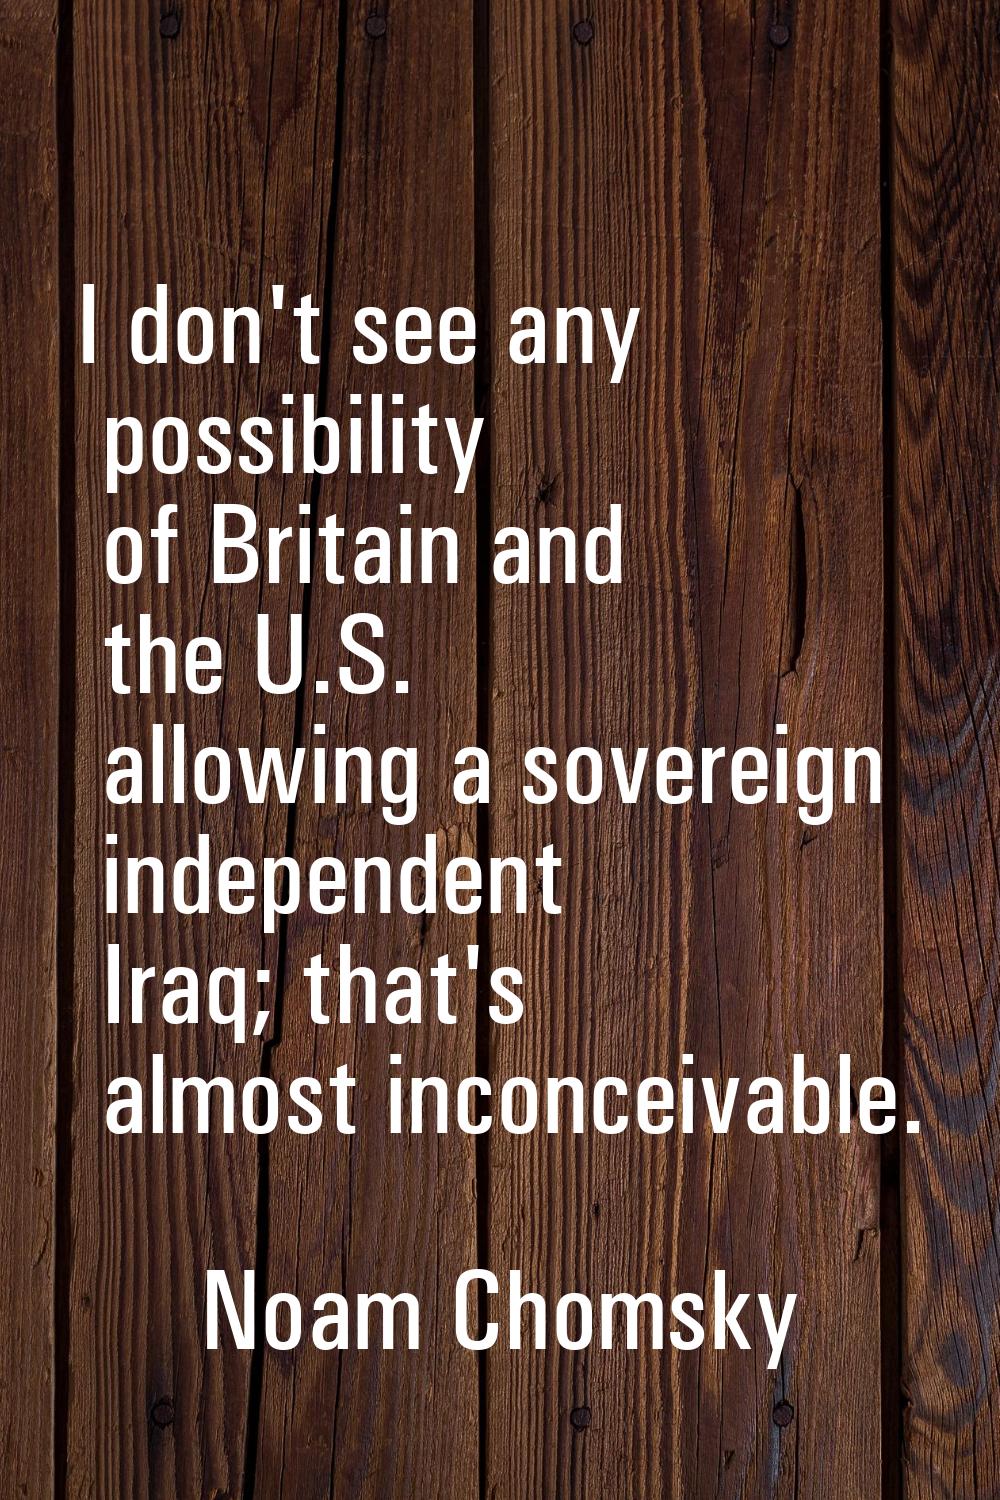 I don't see any possibility of Britain and the U.S. allowing a sovereign independent Iraq; that's a